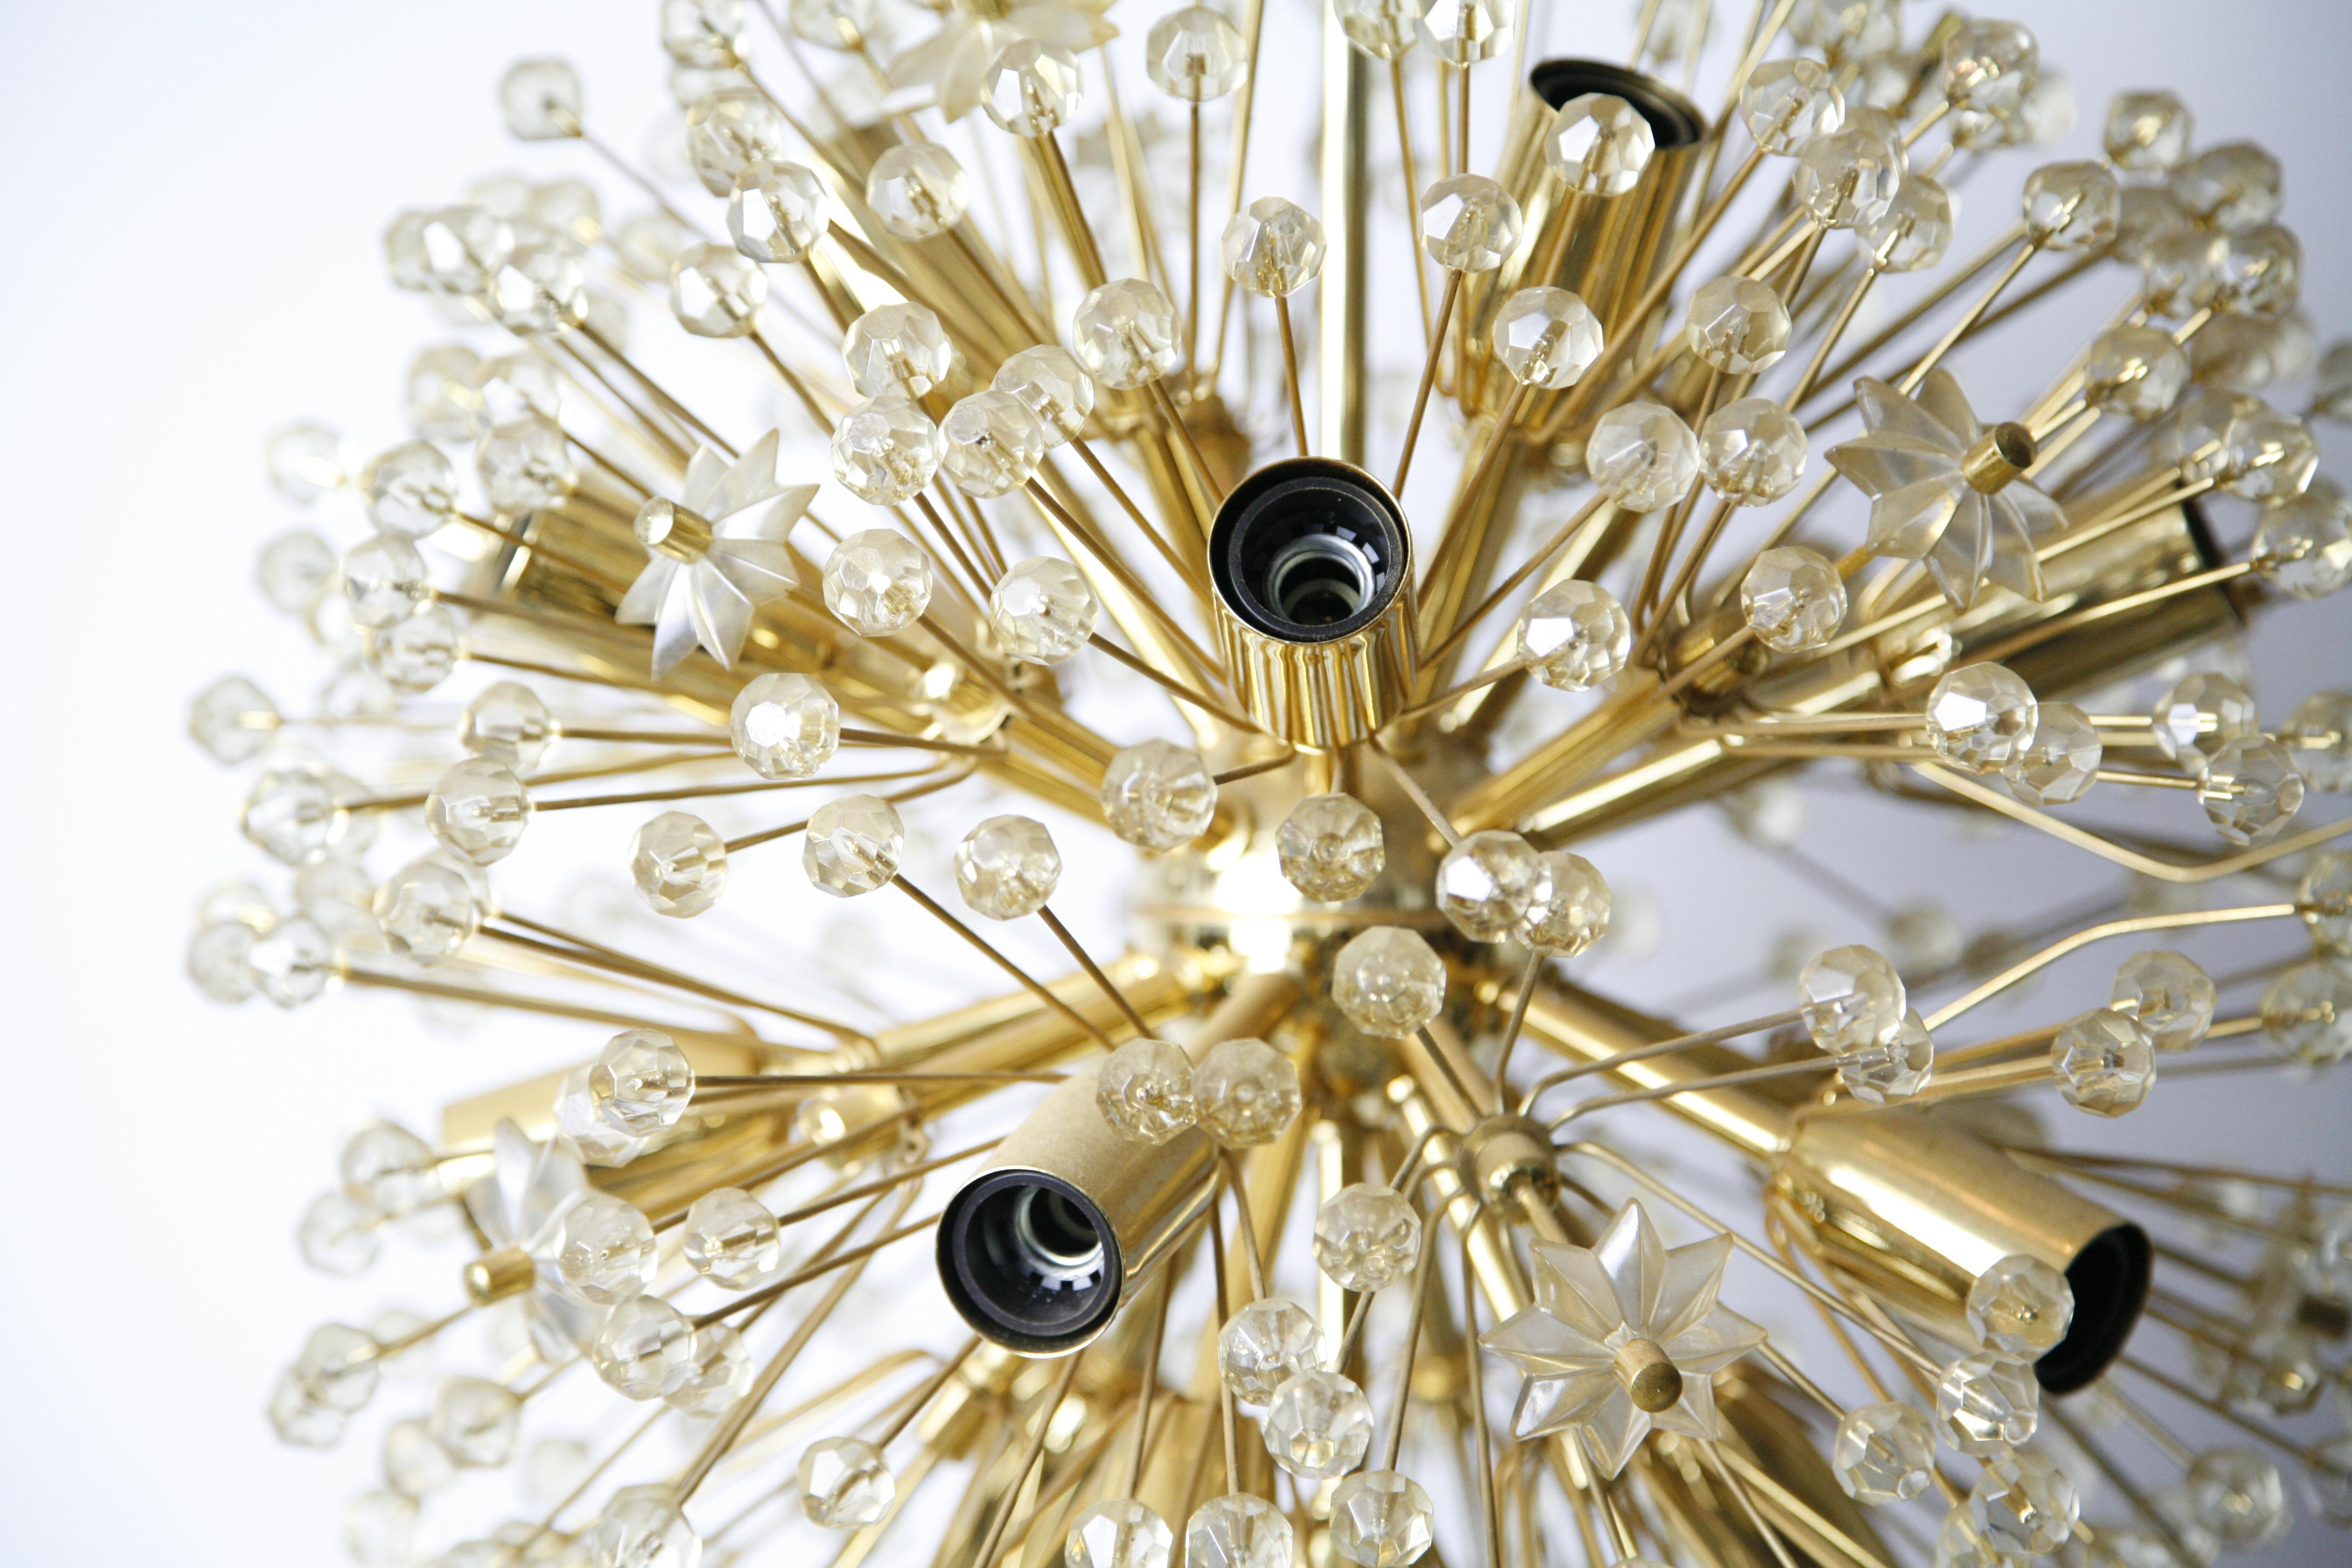 Emil Stejnar for Rupert Nikoll brass and glass Sputnik chandelier, Austria, 1950.
Sputnik chandelier consisting of a brass frame with numerous glass elements in the shape of stars and glass ballslid up by 16 individual bulbs E14